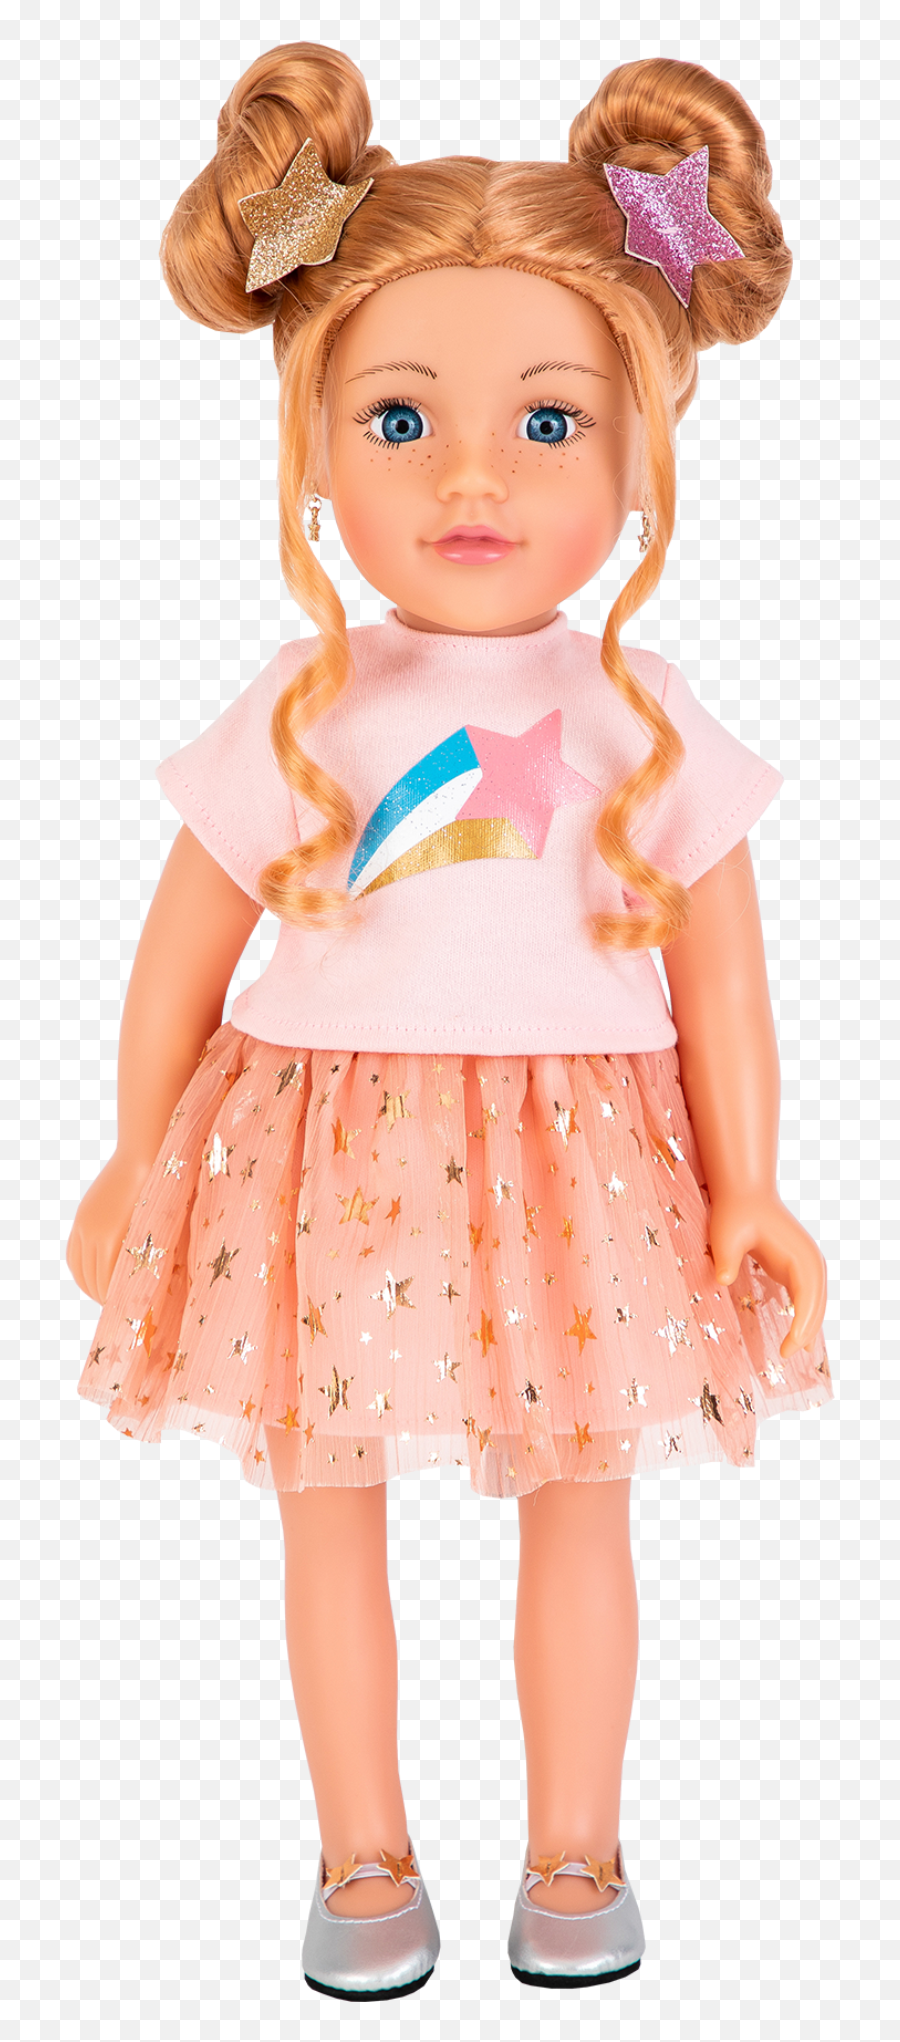 Designafriend Willow Doll - Good Play Guide Good Play Guide Designafriend Doll Willow Emoji,Lifelike Doll Showing Emotions